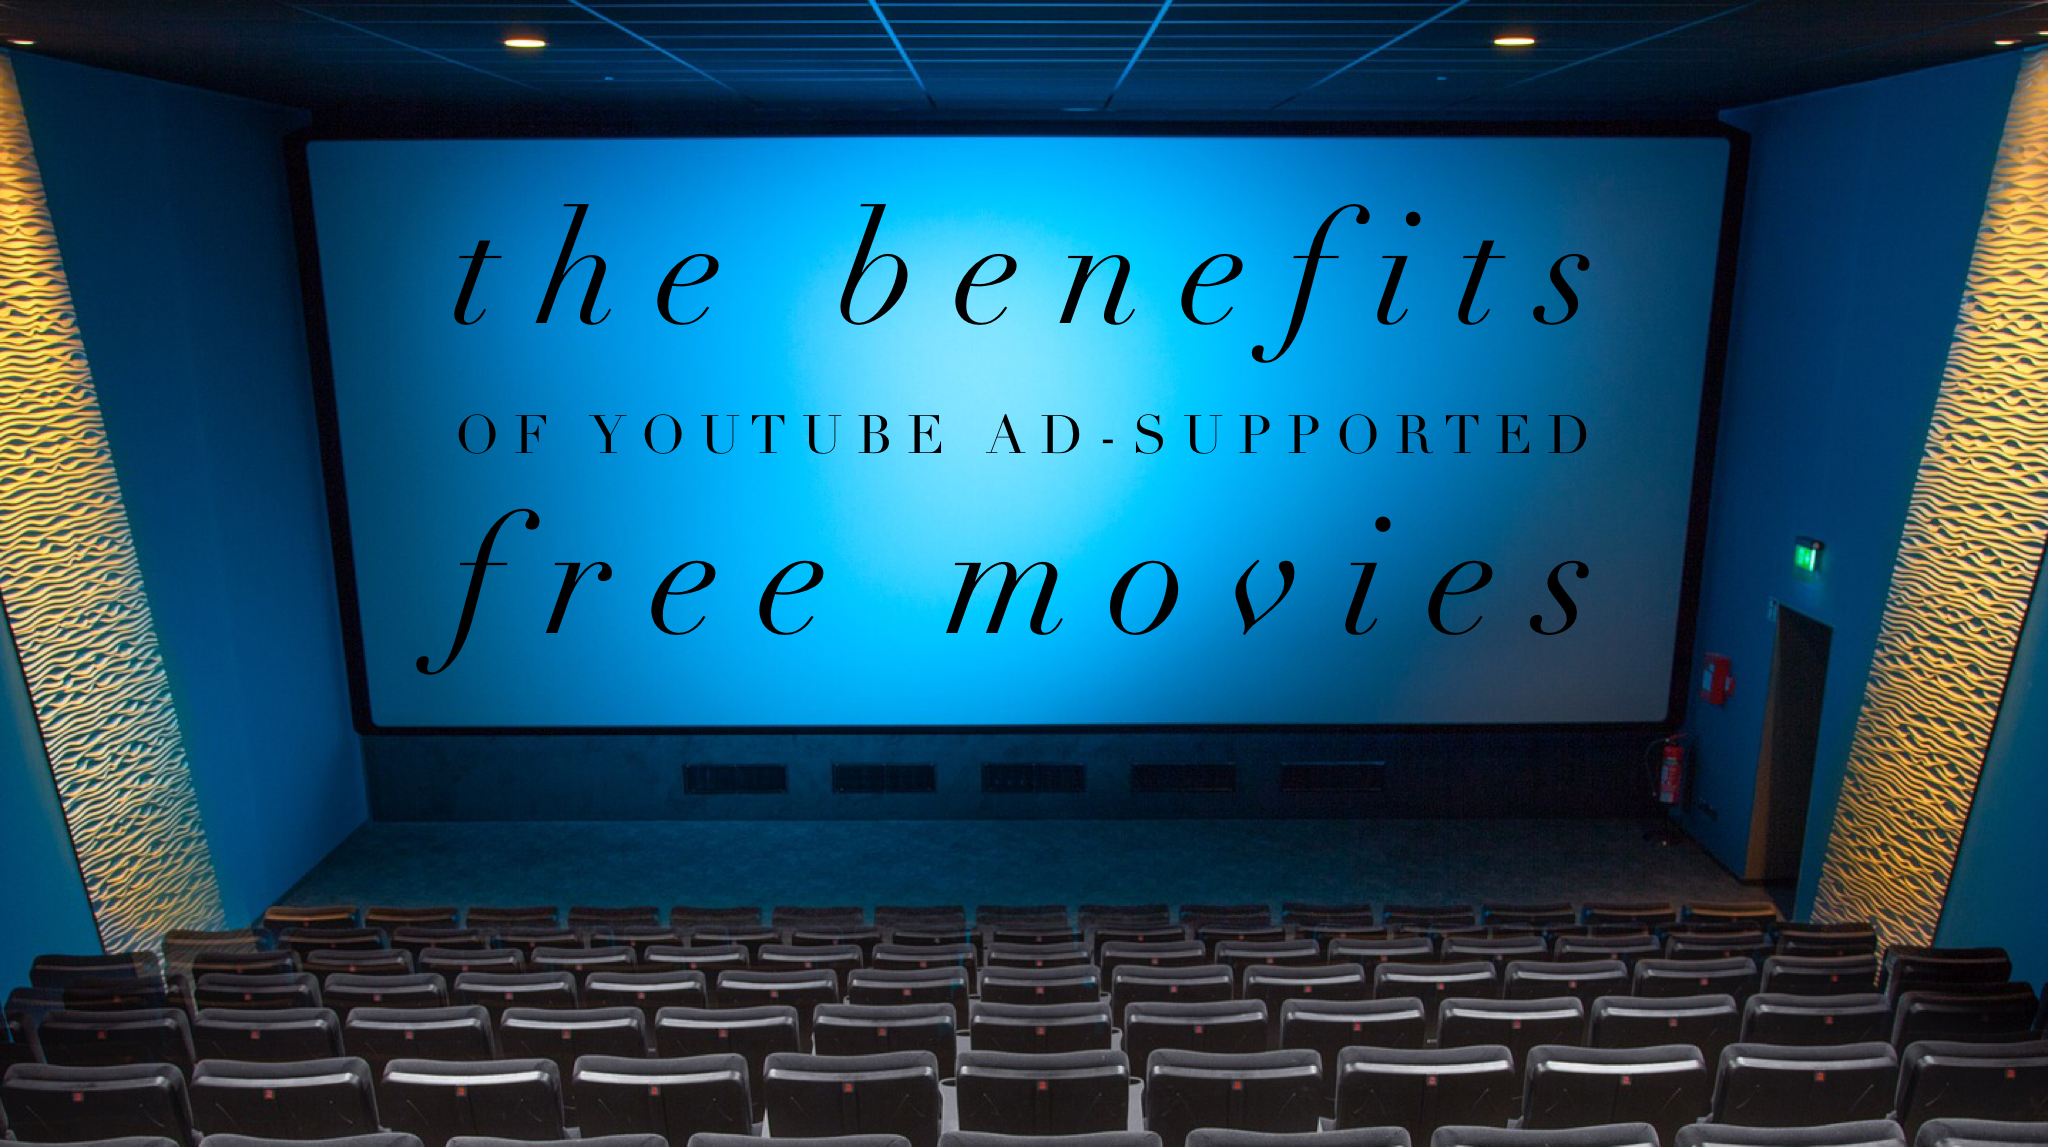 The Benefits of Youtube Ad-Supported Free Movies